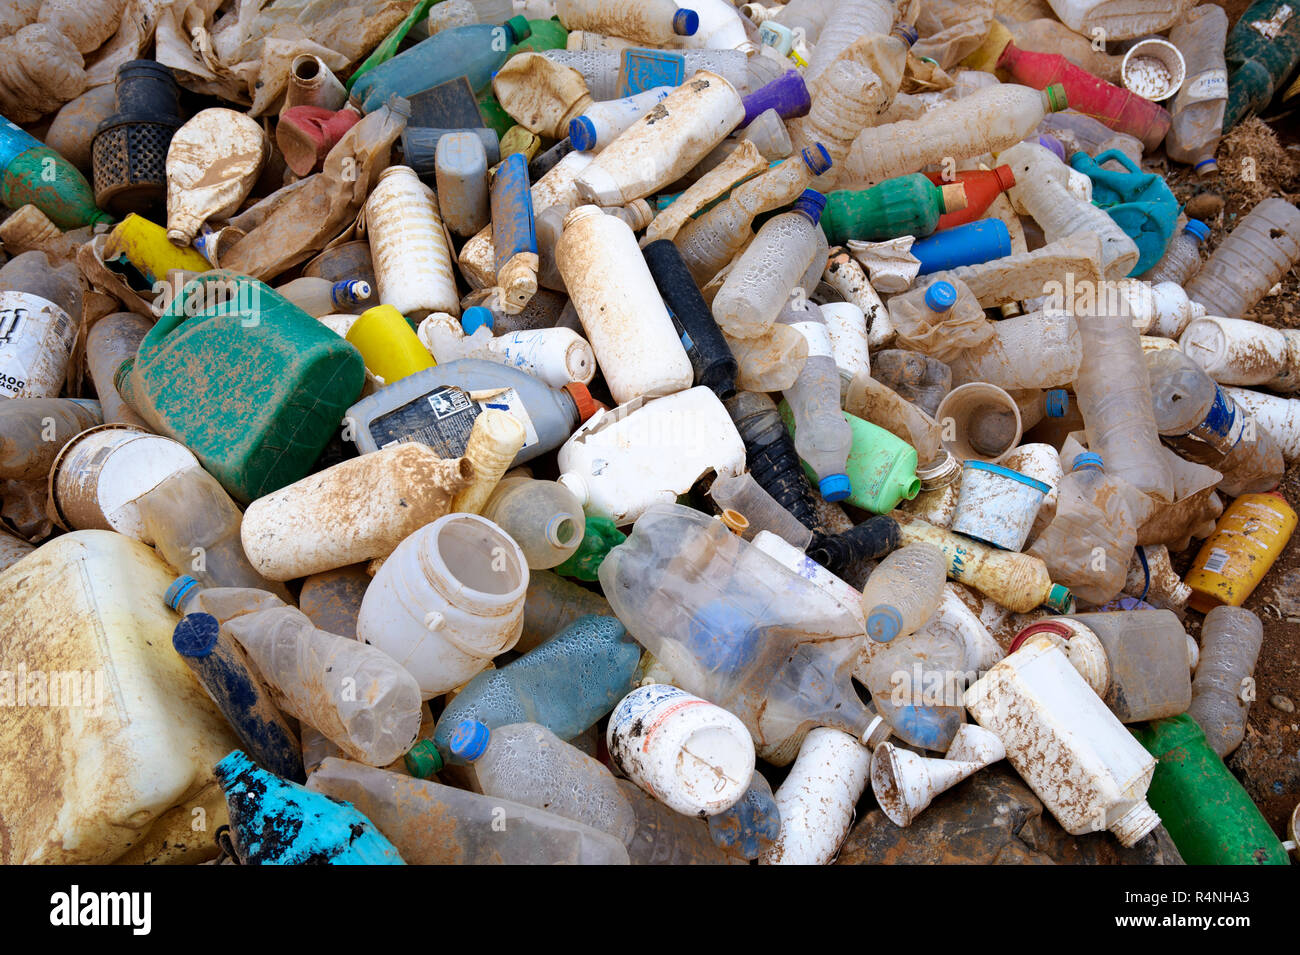 Ocean pollution: plastic bottles and containers washed up on a beach of the island of Amorgos, Greece. Stock Photo